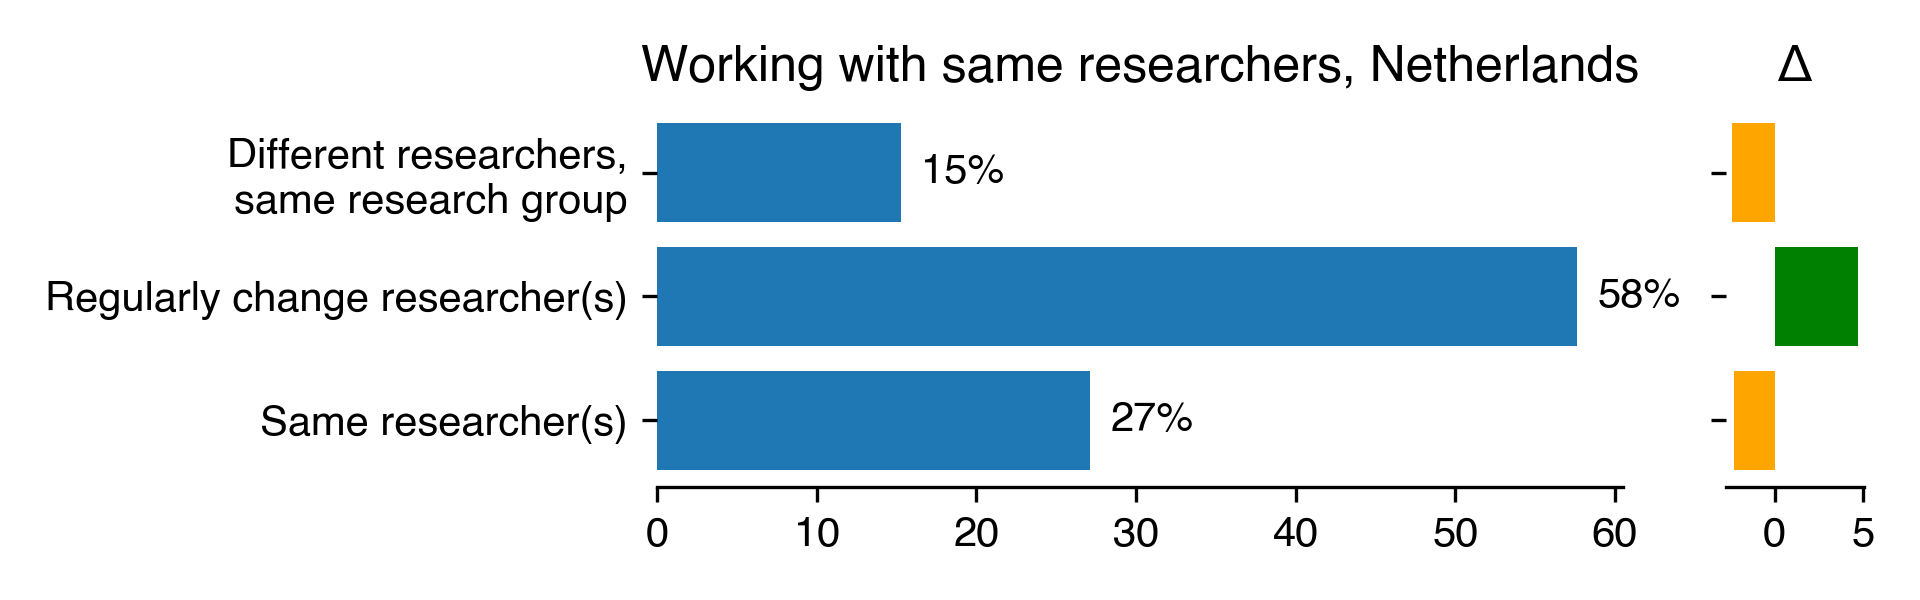 working-with-same-researchers